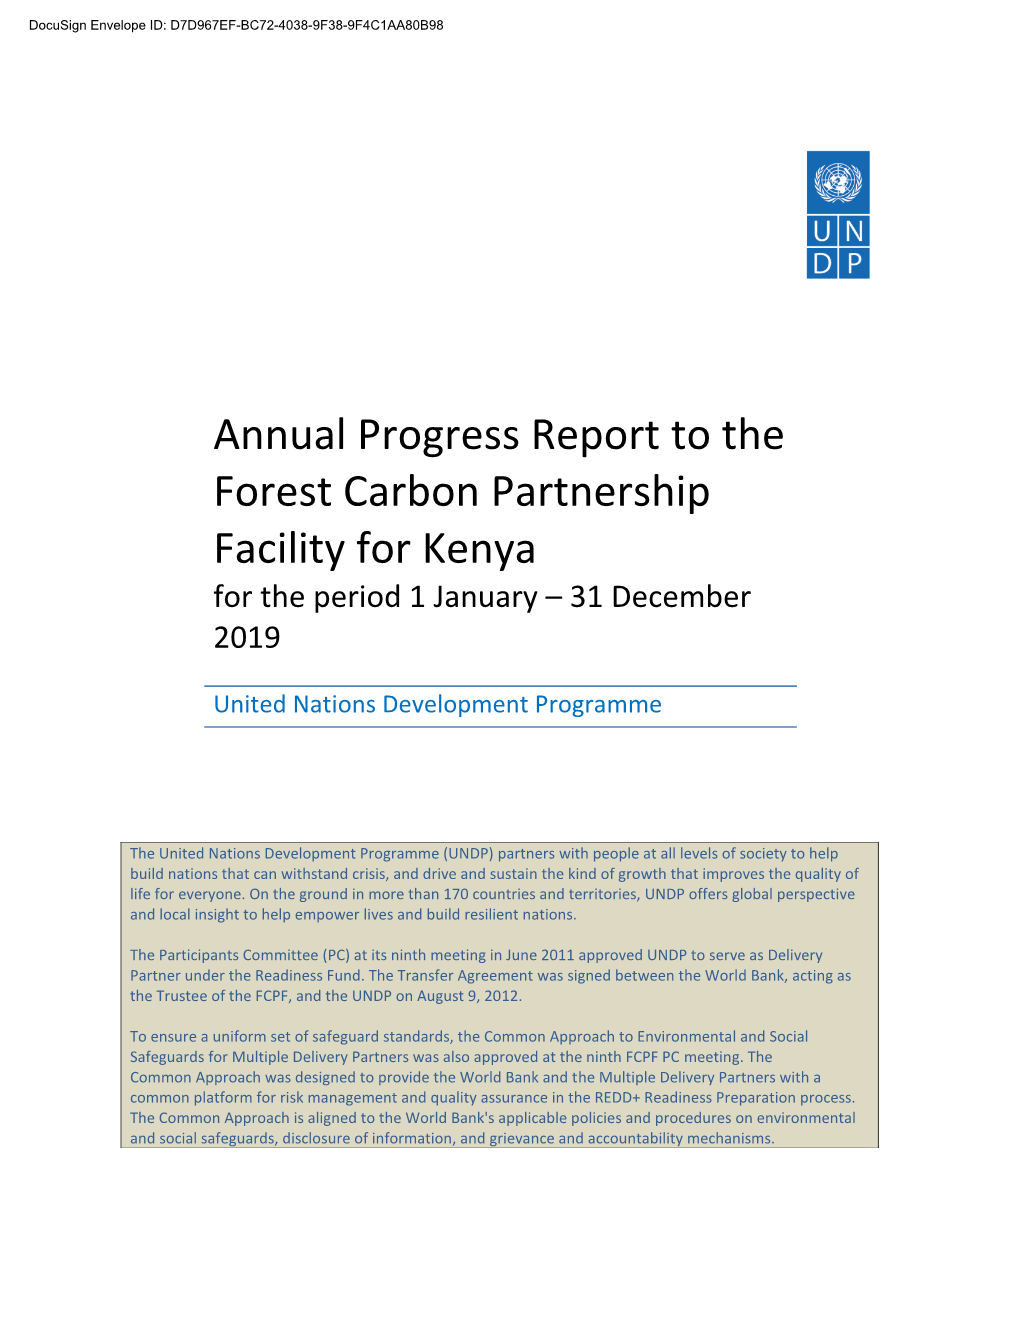 Annual Progress Report to the Forest Carbon Partnership Facility for Kenya